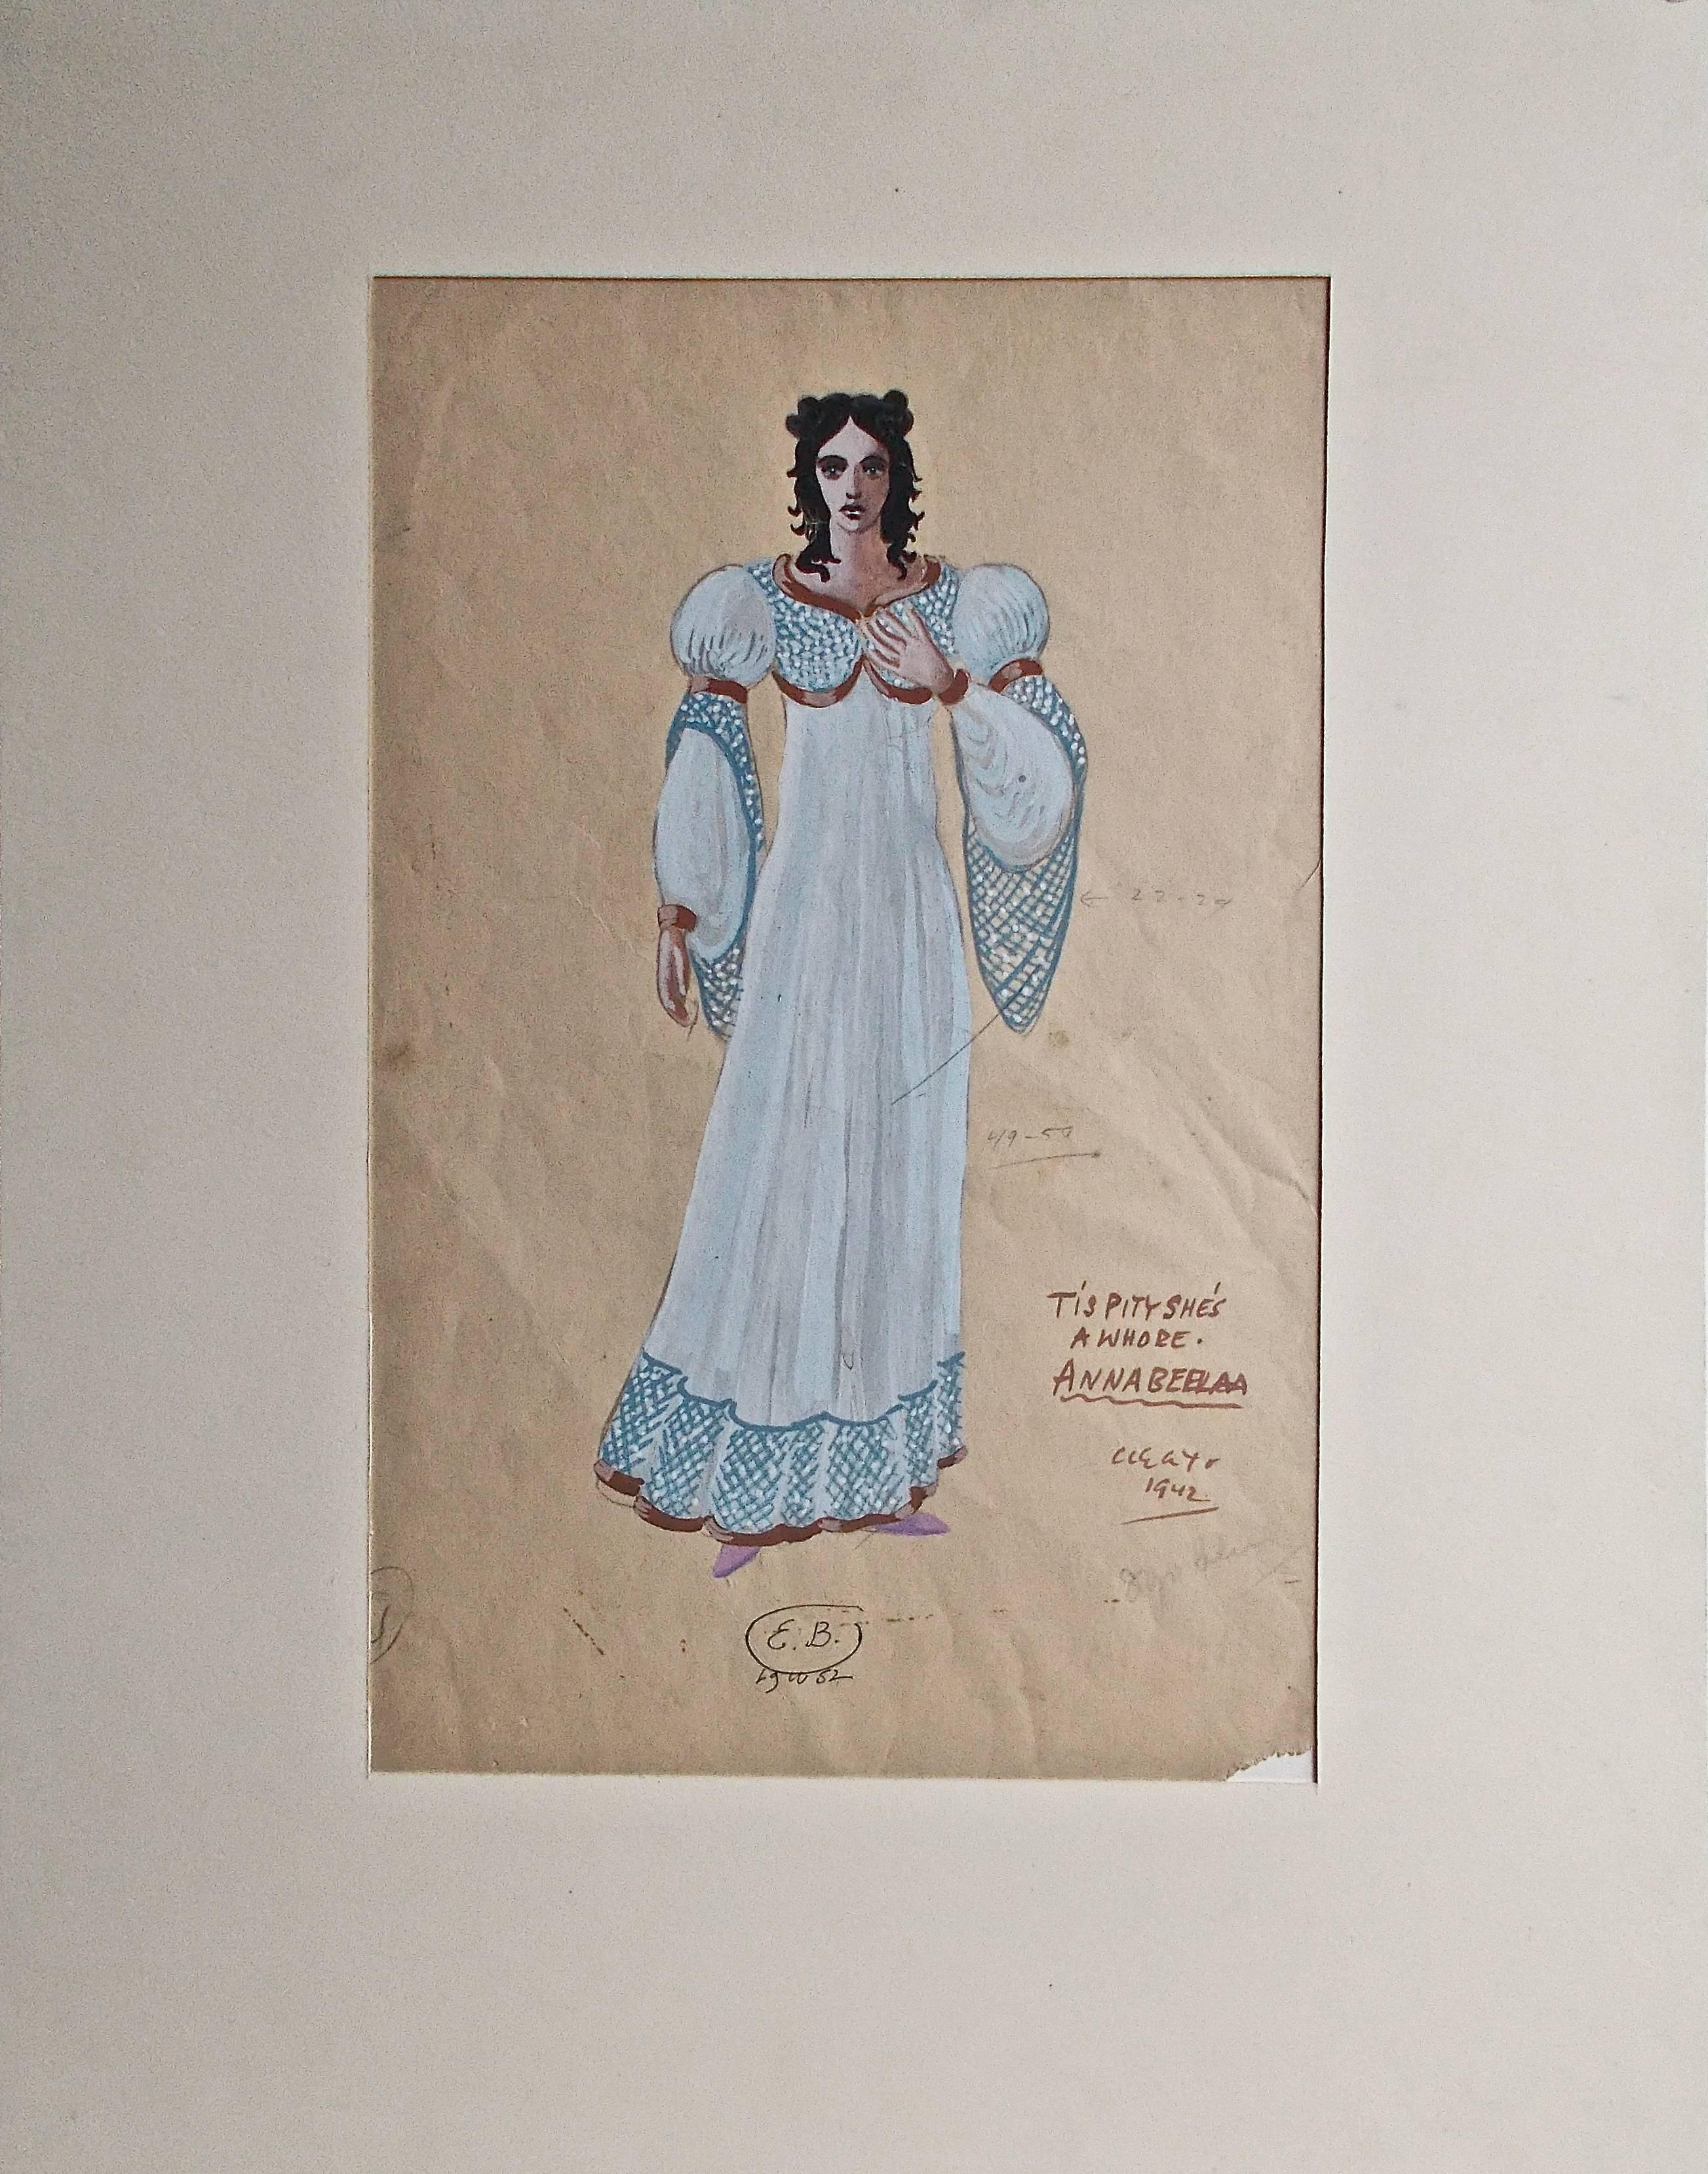 Gouache on paper costume design for Annabella, for the John Ford play: 